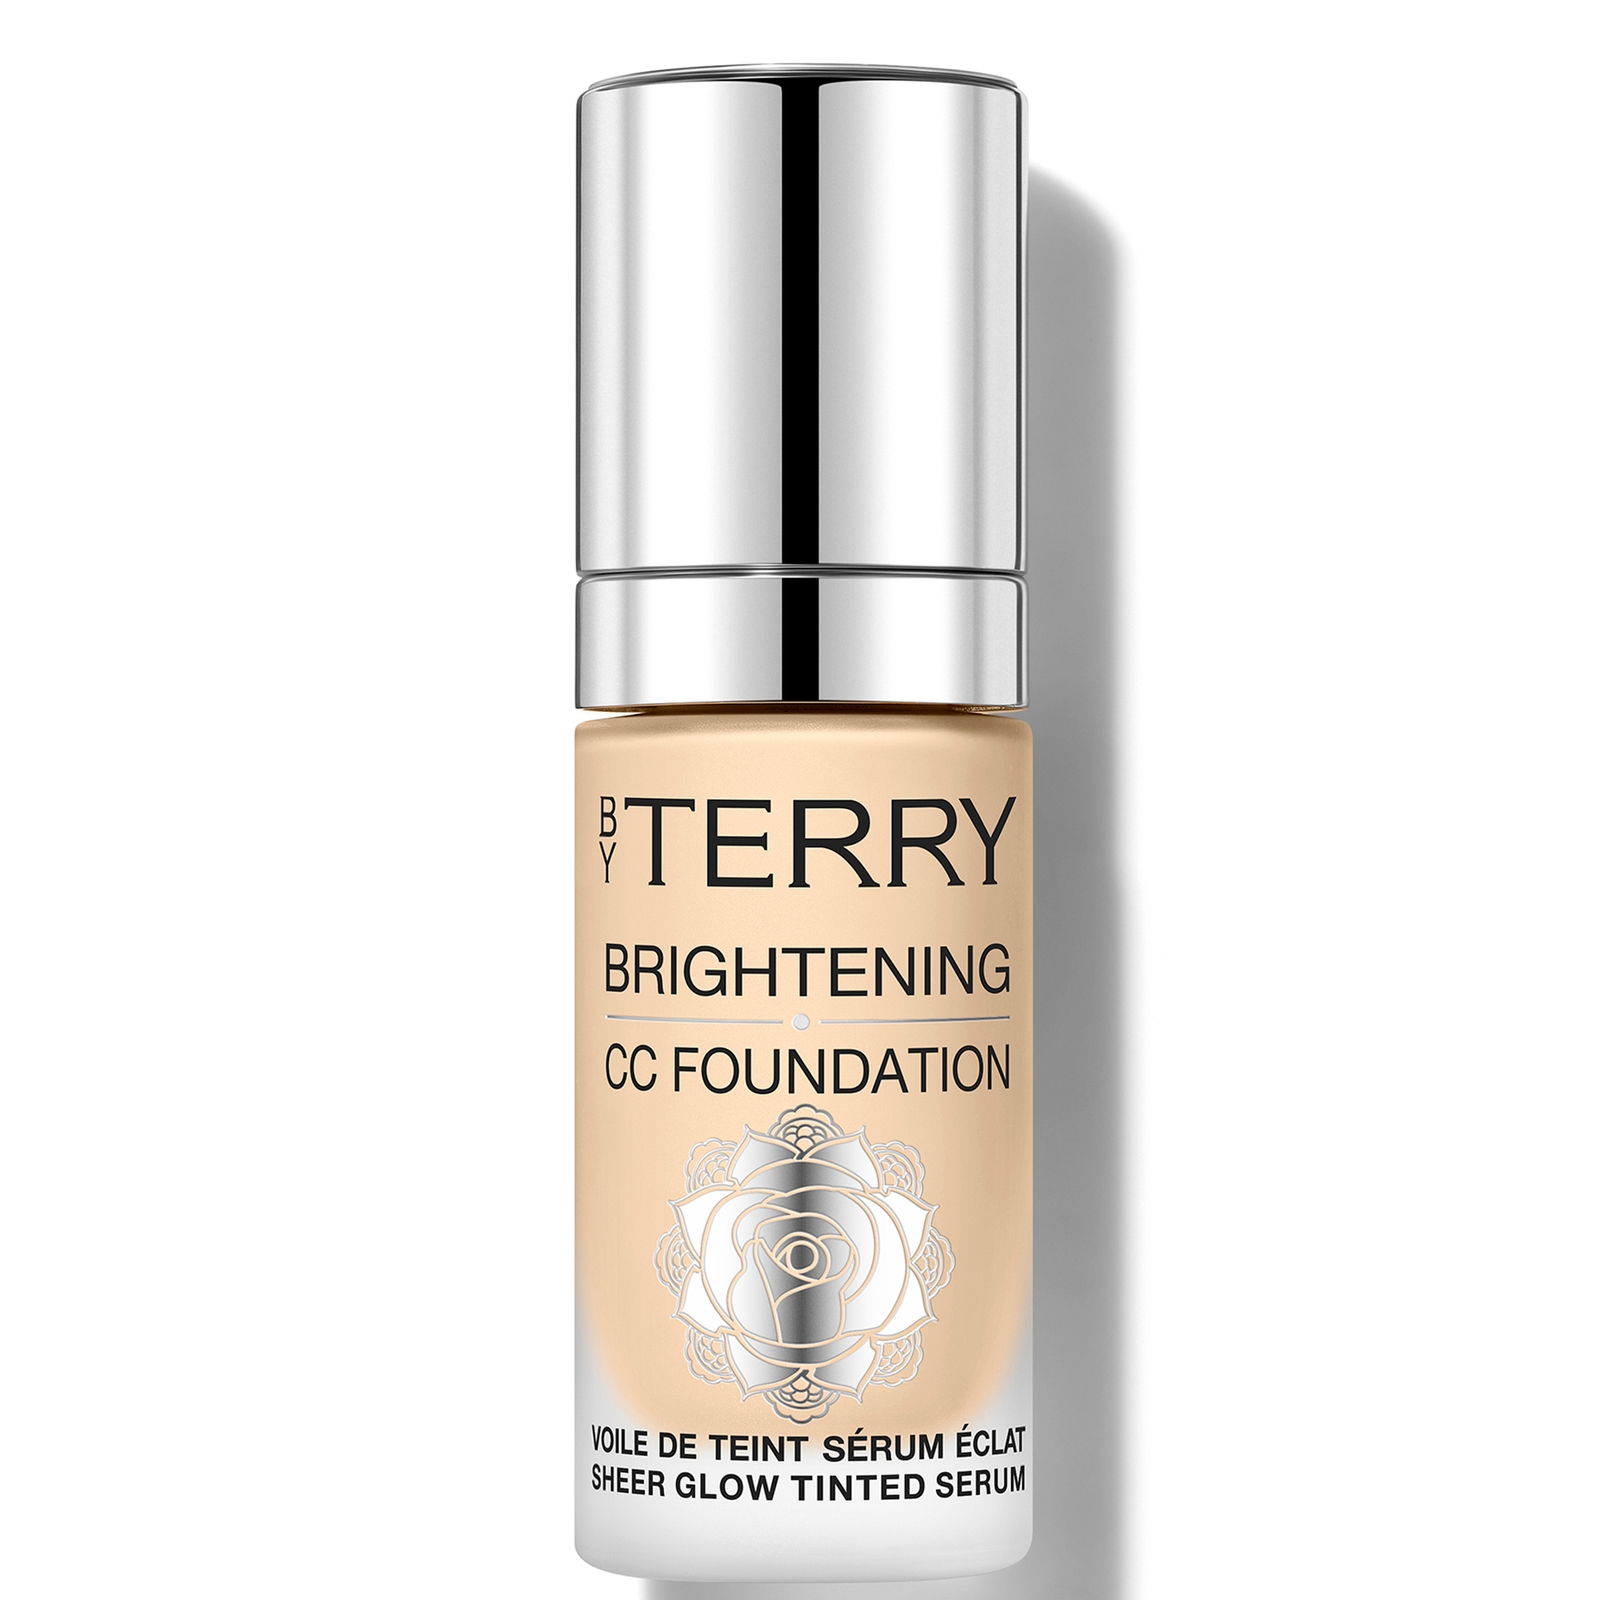 By Terry Brightening Cc Foundation 30ml (various Shades) - 2w In Neutral